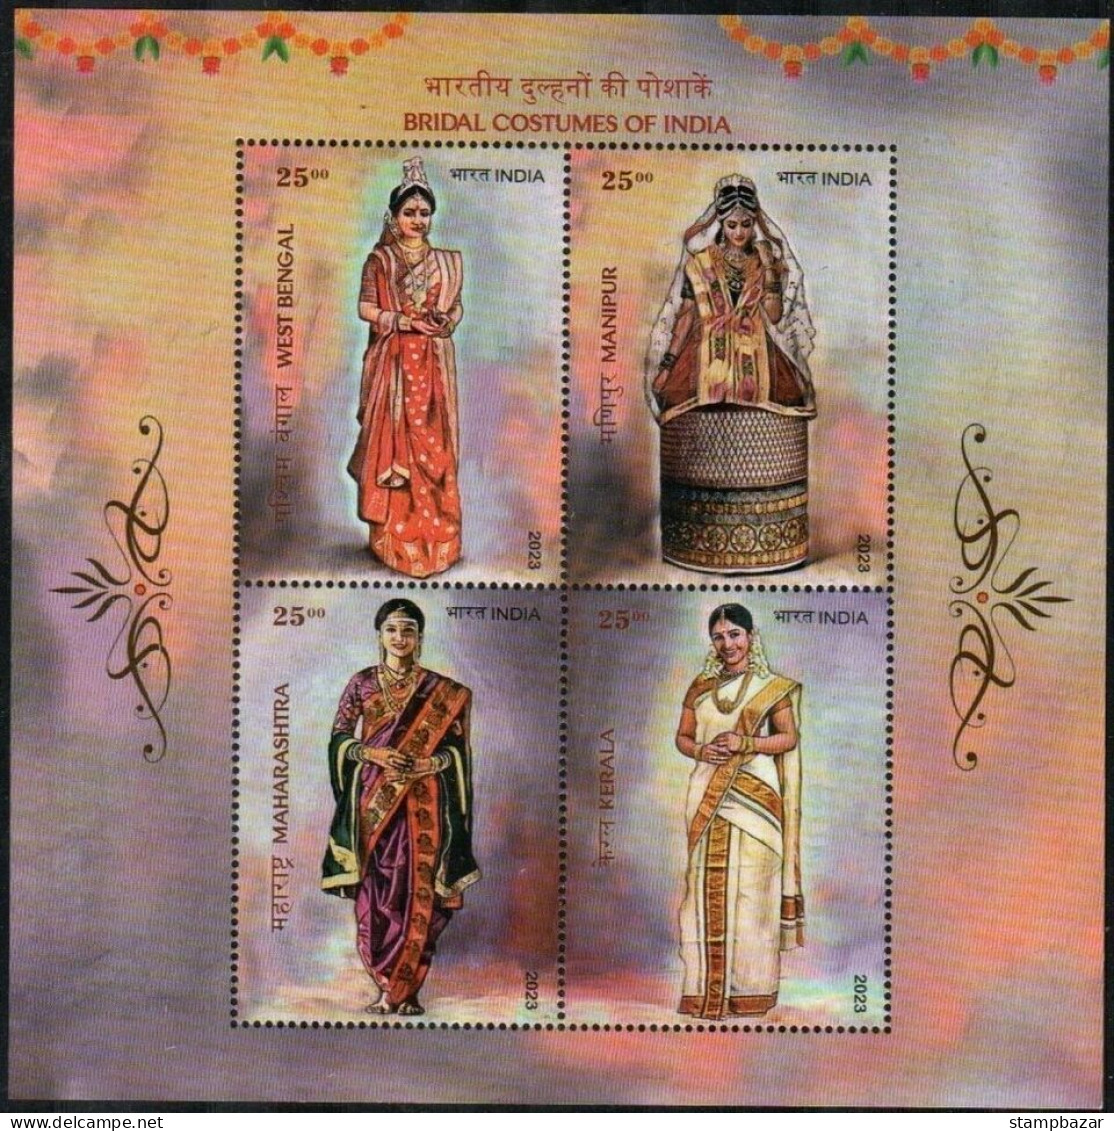 India 2023 Complete Year Set of Miniature sheets Birds 11v Various themes